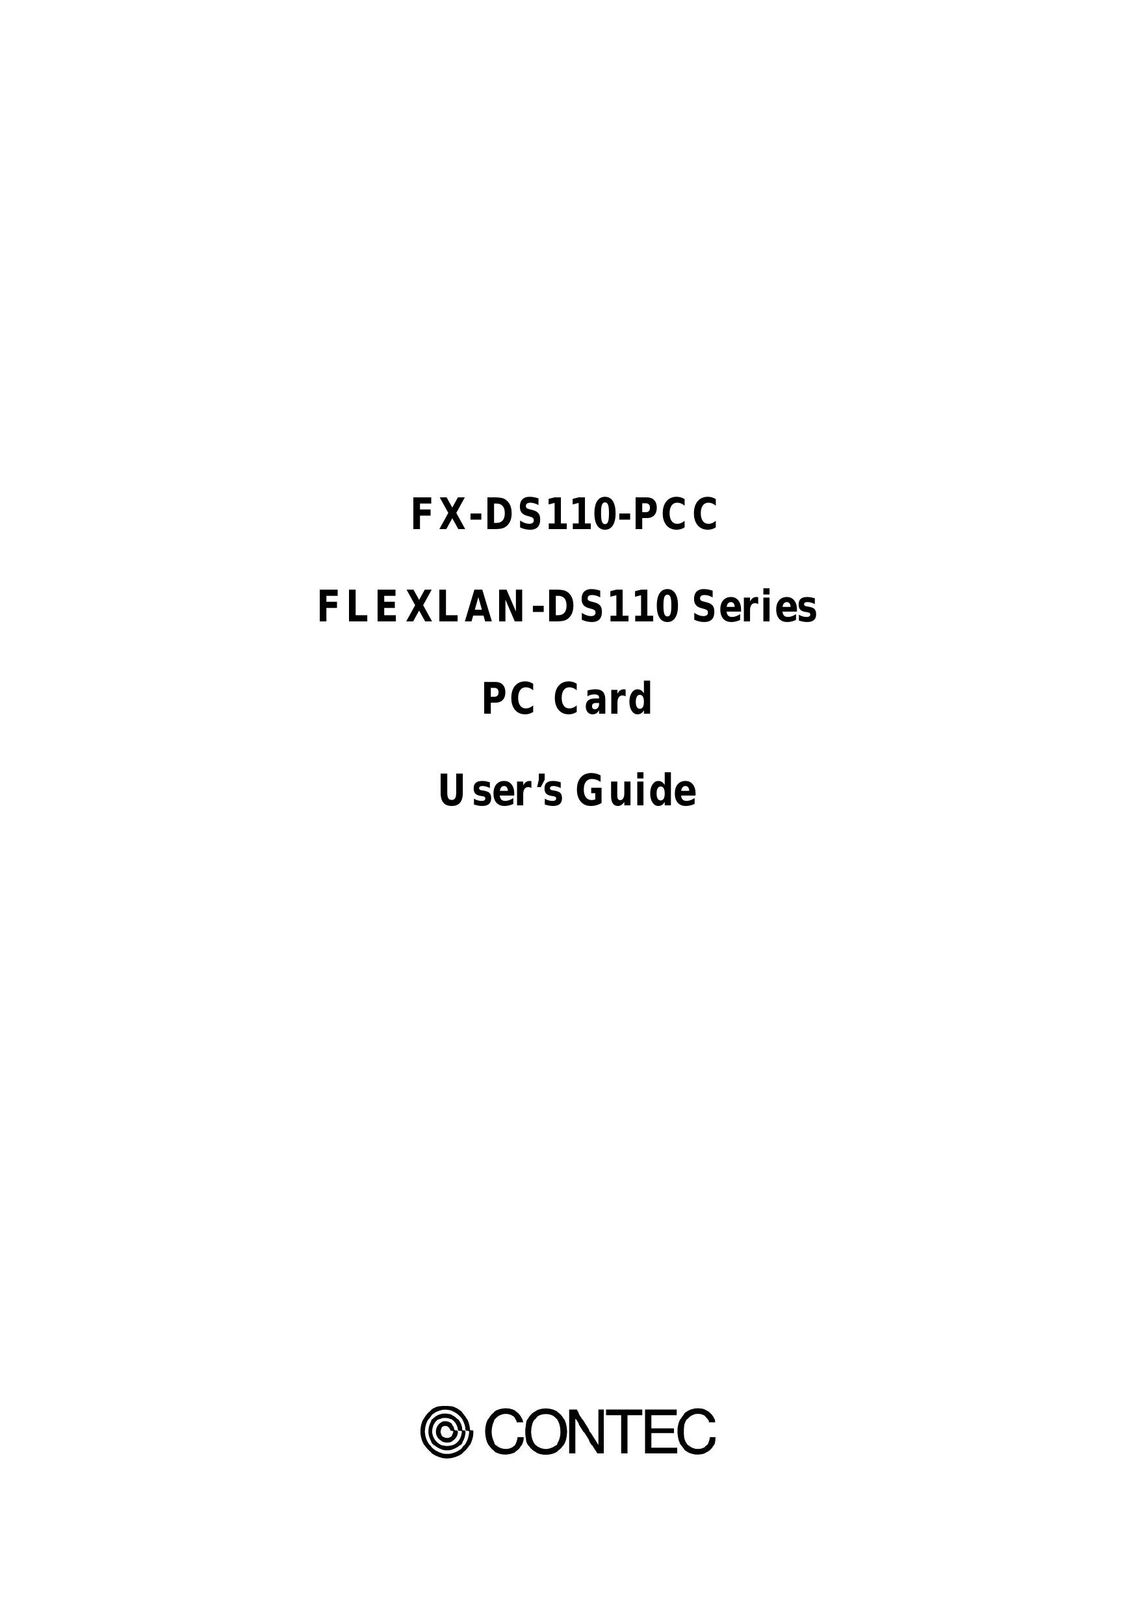 Contec FX-DS-110-PCC Network Card User Manual